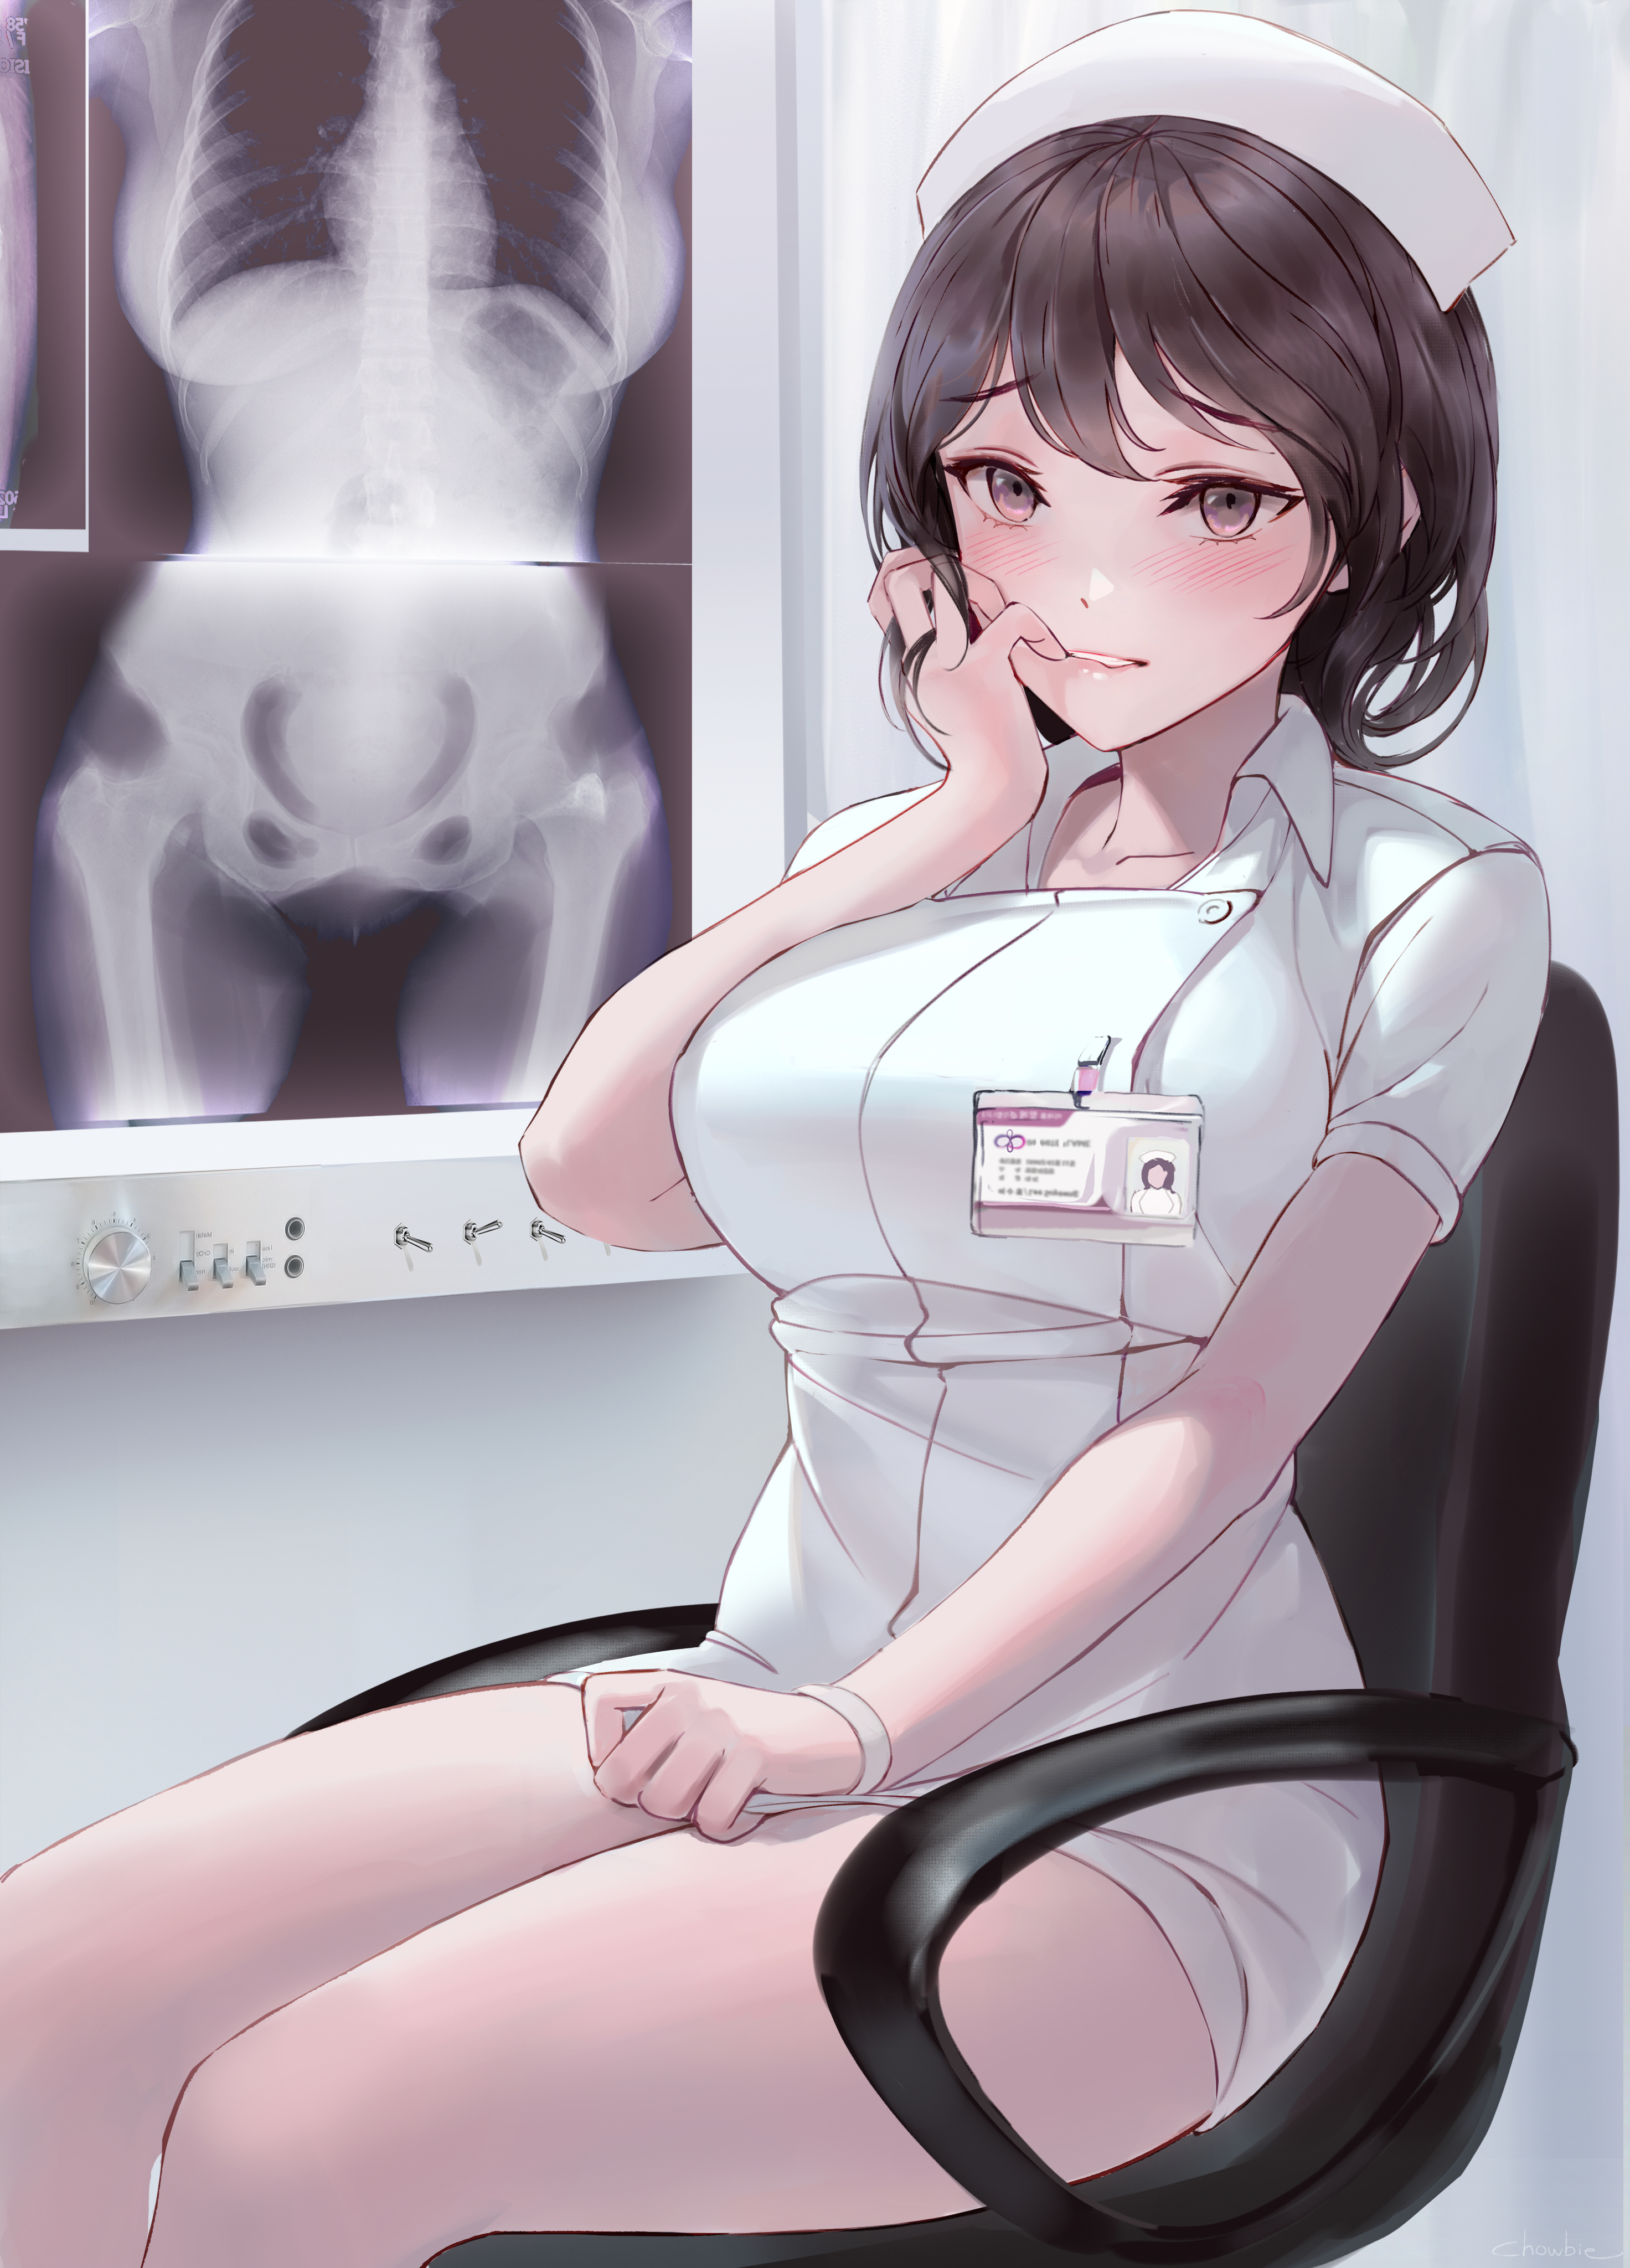 Anime 2944x4096 nurses anime girls x-rays ID card portrait display chair nurse outfit short hair looking at viewer blushing sitting legs thighs touching face brunette brown eyes biting lips